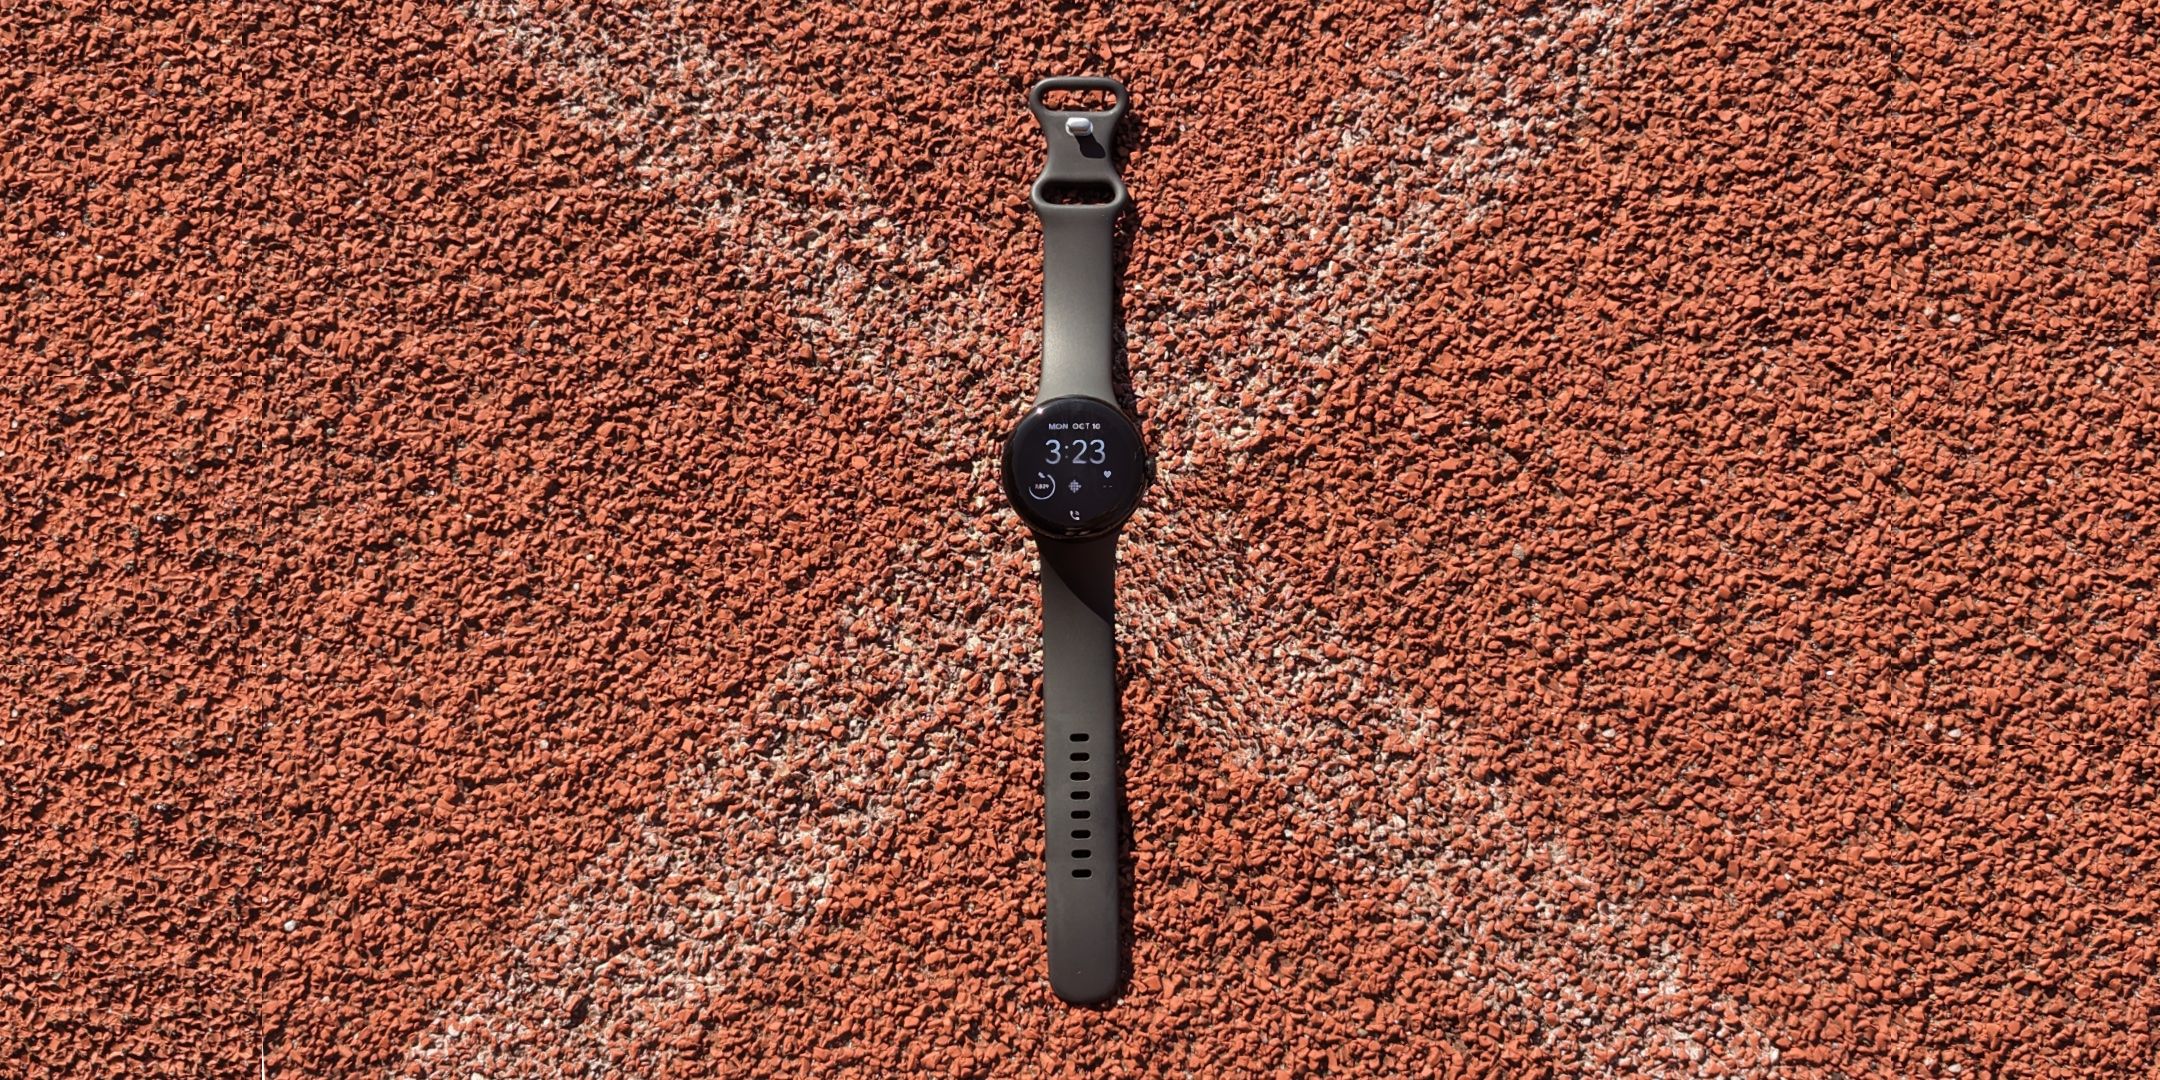 Pixel watch on a running track.